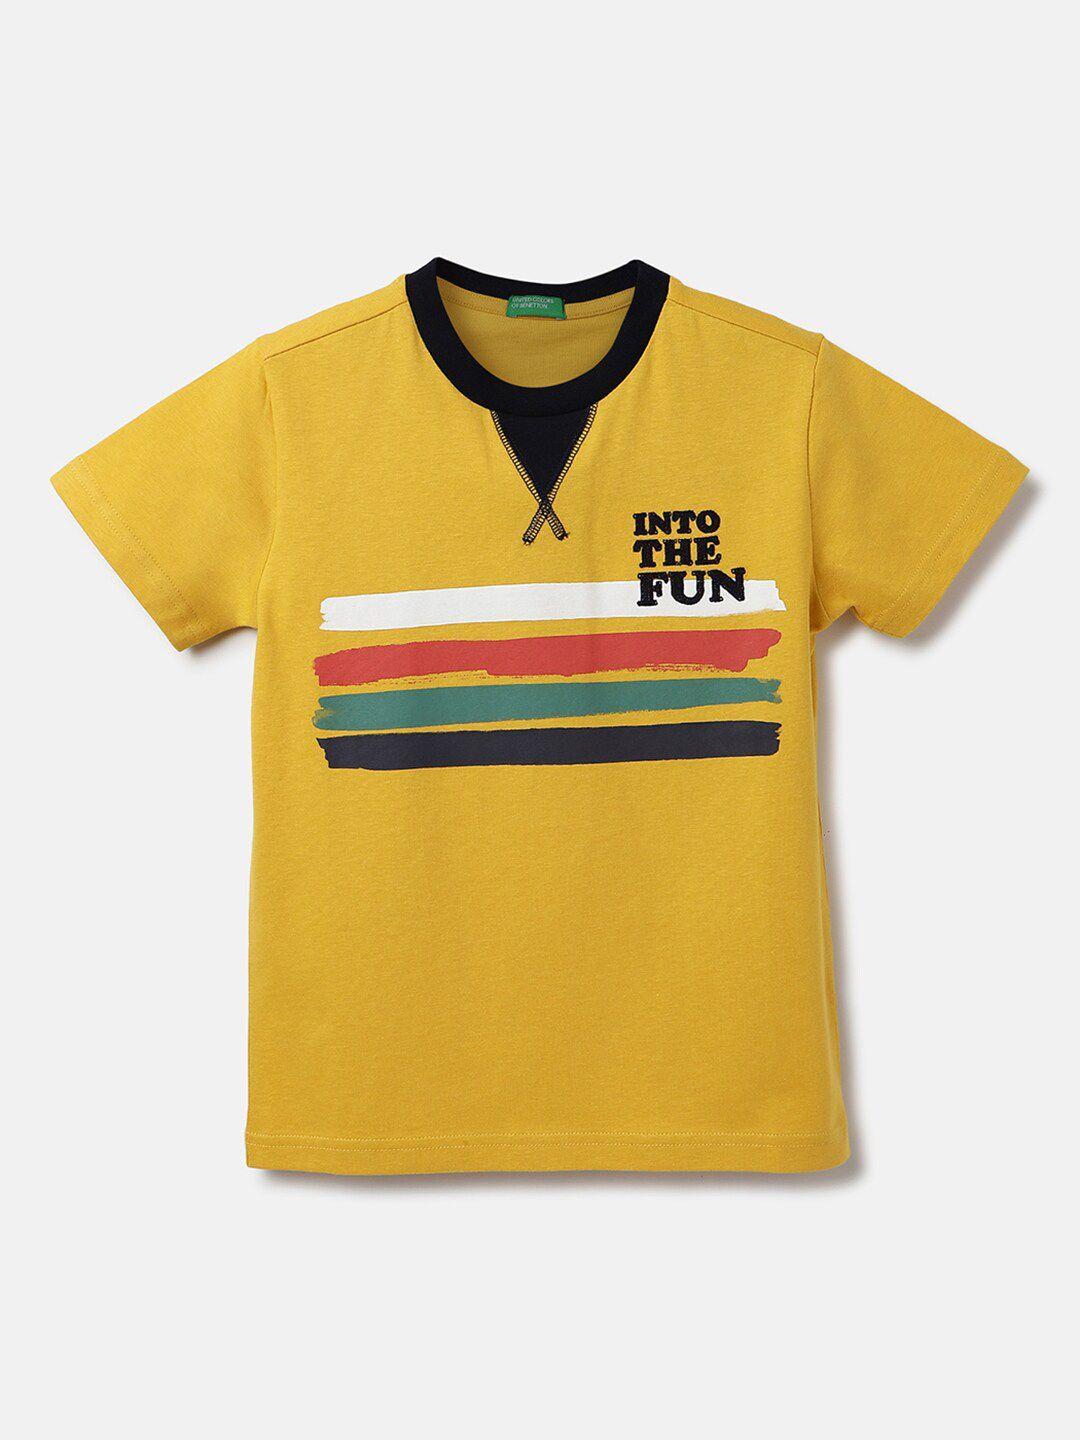 united colors of benetton boys striped t-shirt